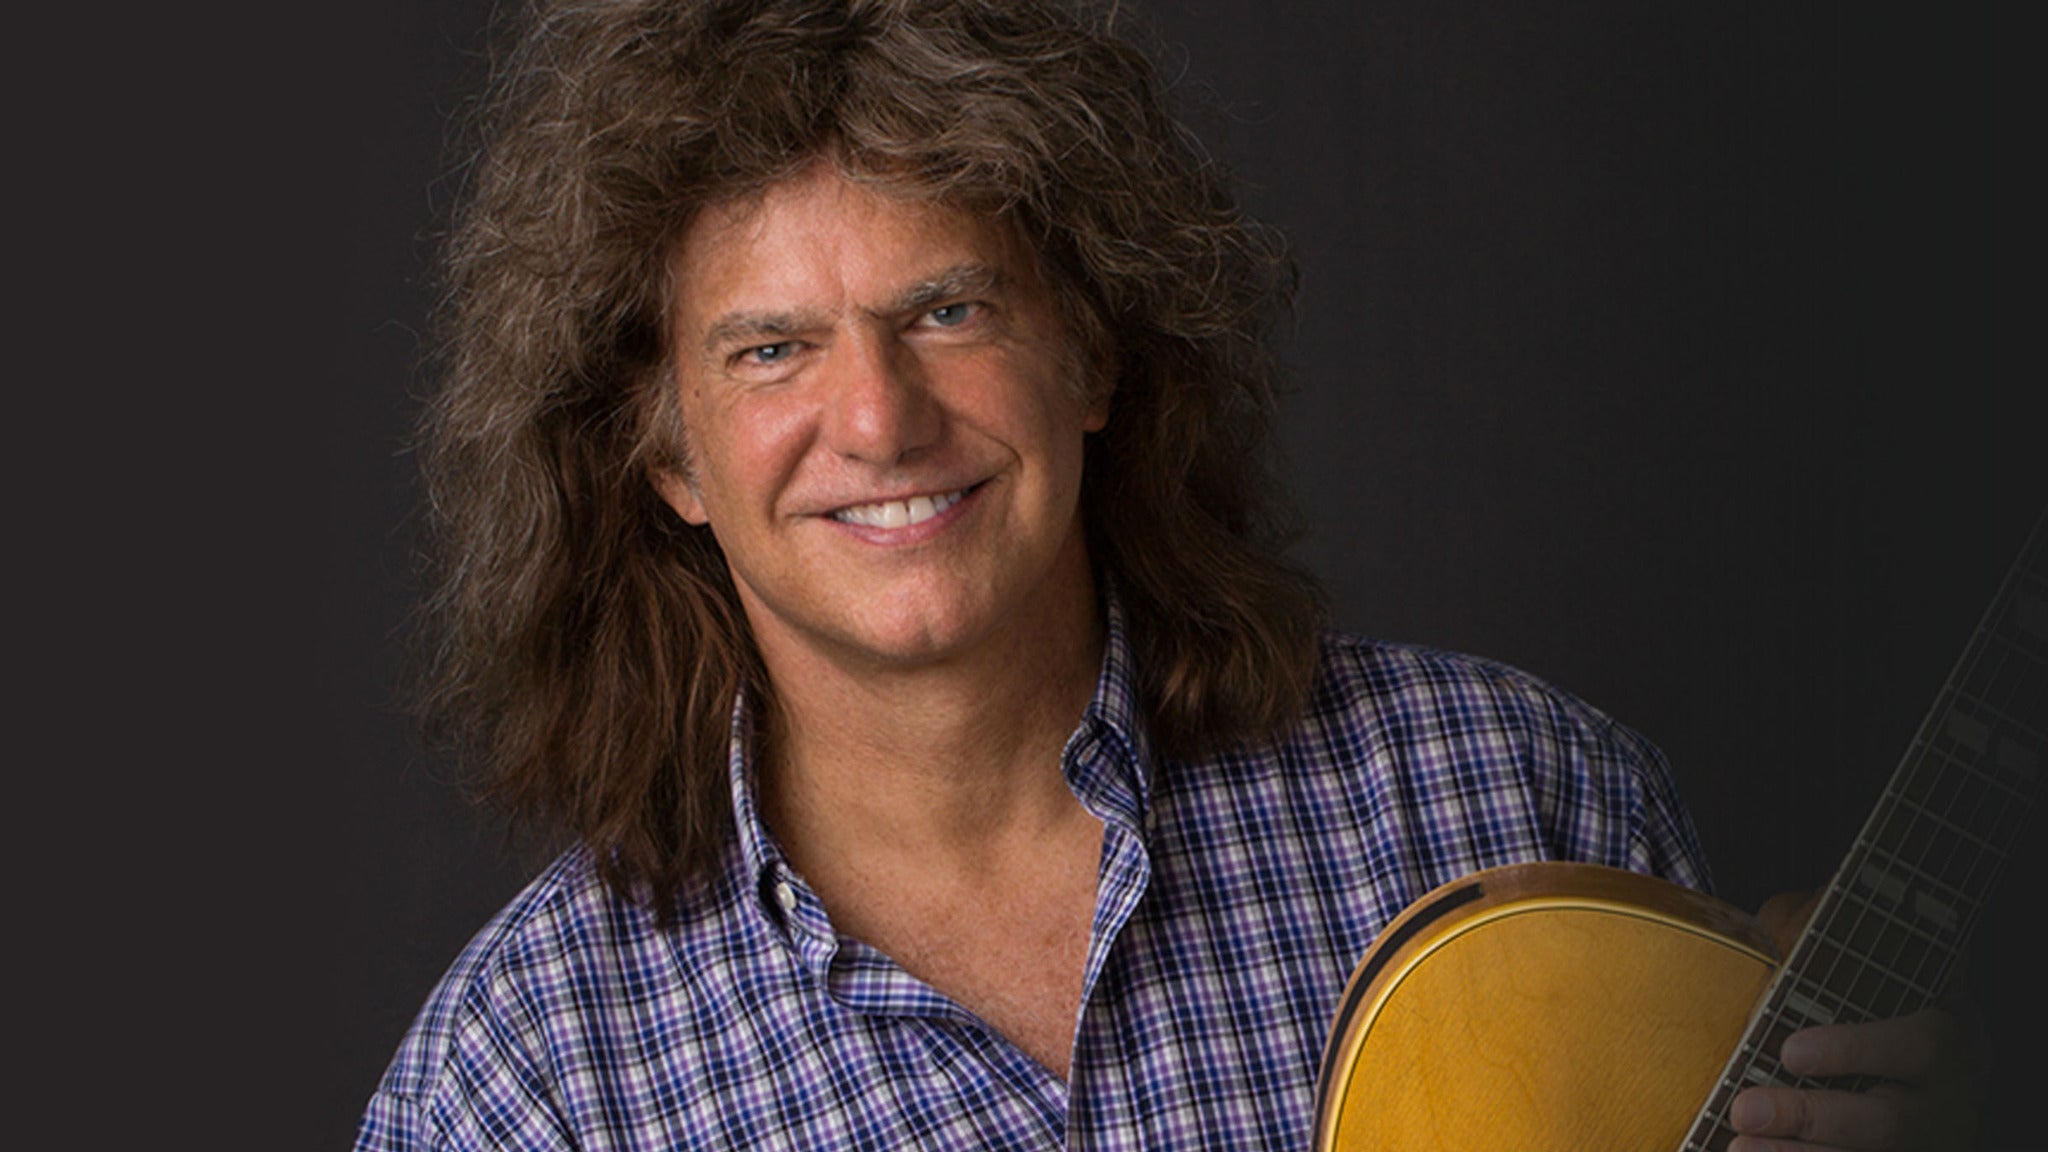 Image used with permission from Ticketmaster | Pat Metheny tickets